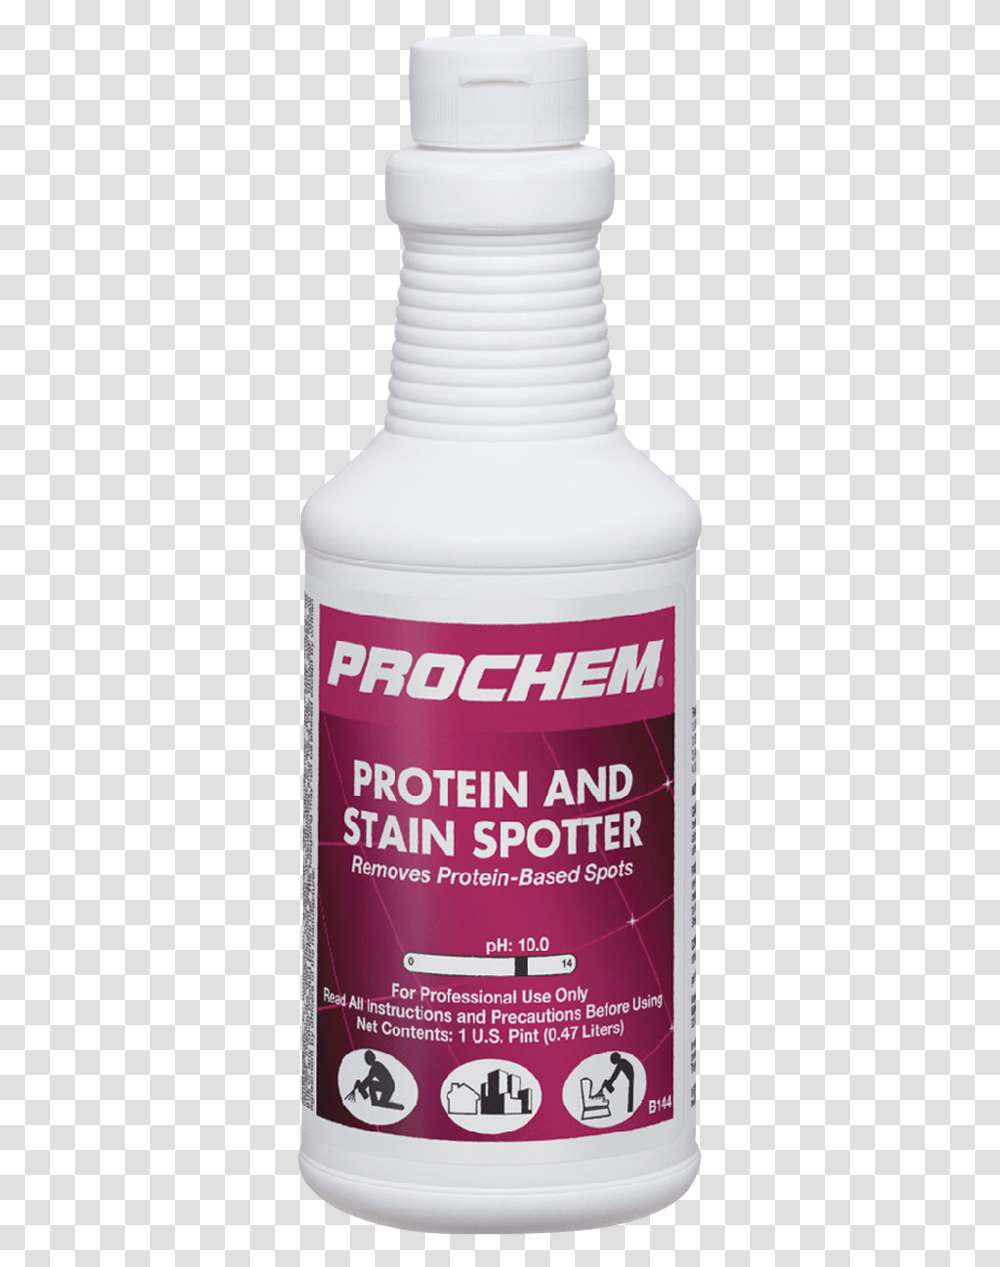 Prochem Protein And Stain Spotter, Beer, Wedding Cake, Dessert, Food Transparent Png